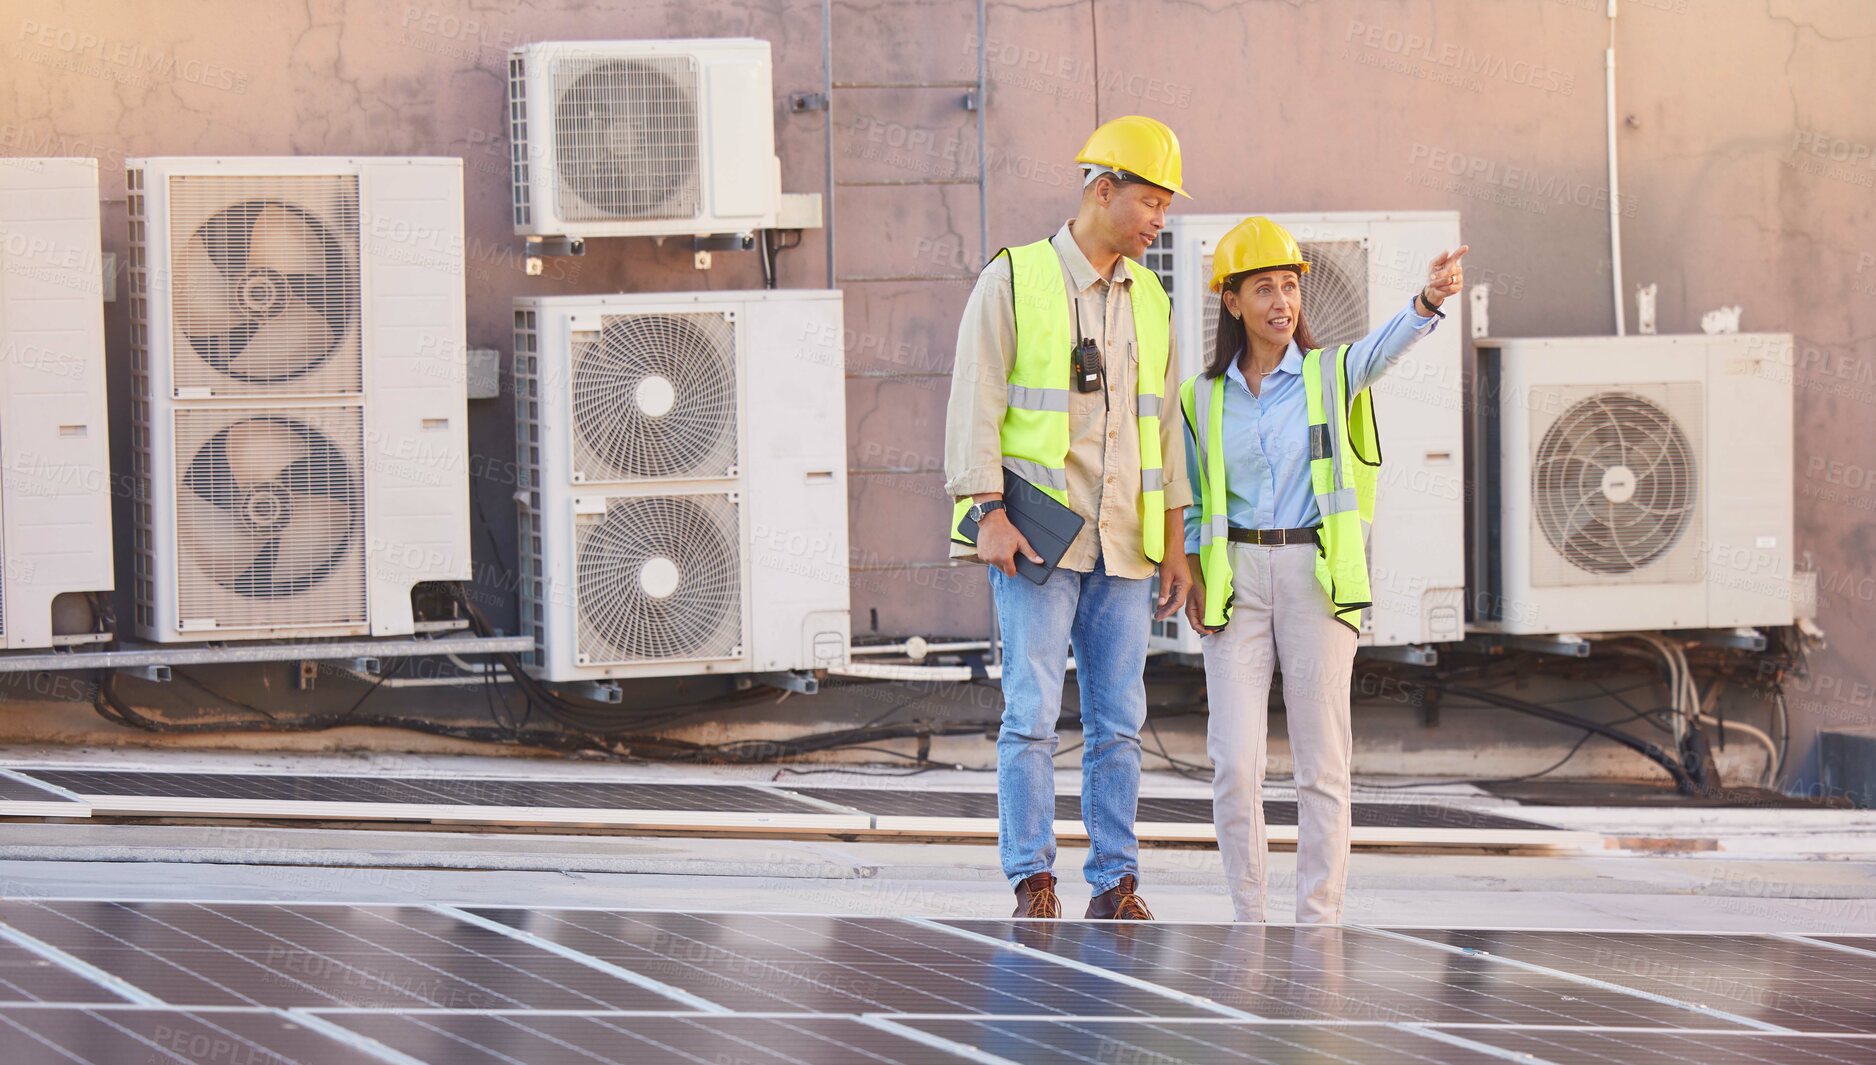 Buy stock photo Solar panels, roof or engineering team planning photovoltaic construction for renewable energy development. Solar energy, innovation or engineers working on an industrial building or grid project